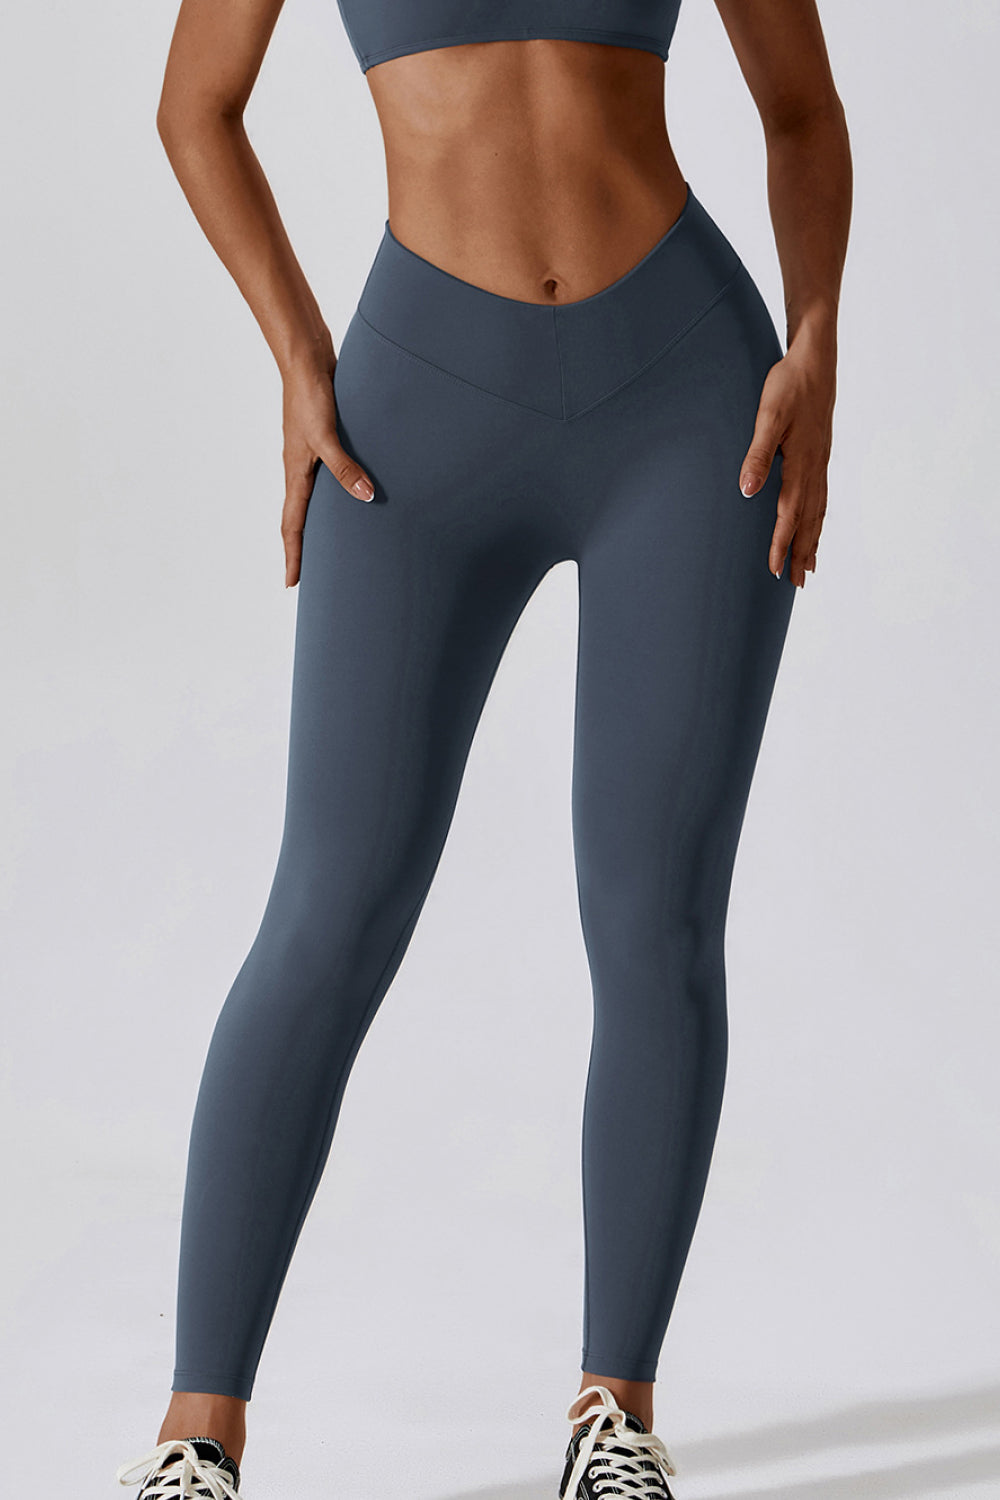 Tropic Pacific Slim Fit Wide Waistband Sports Leggings